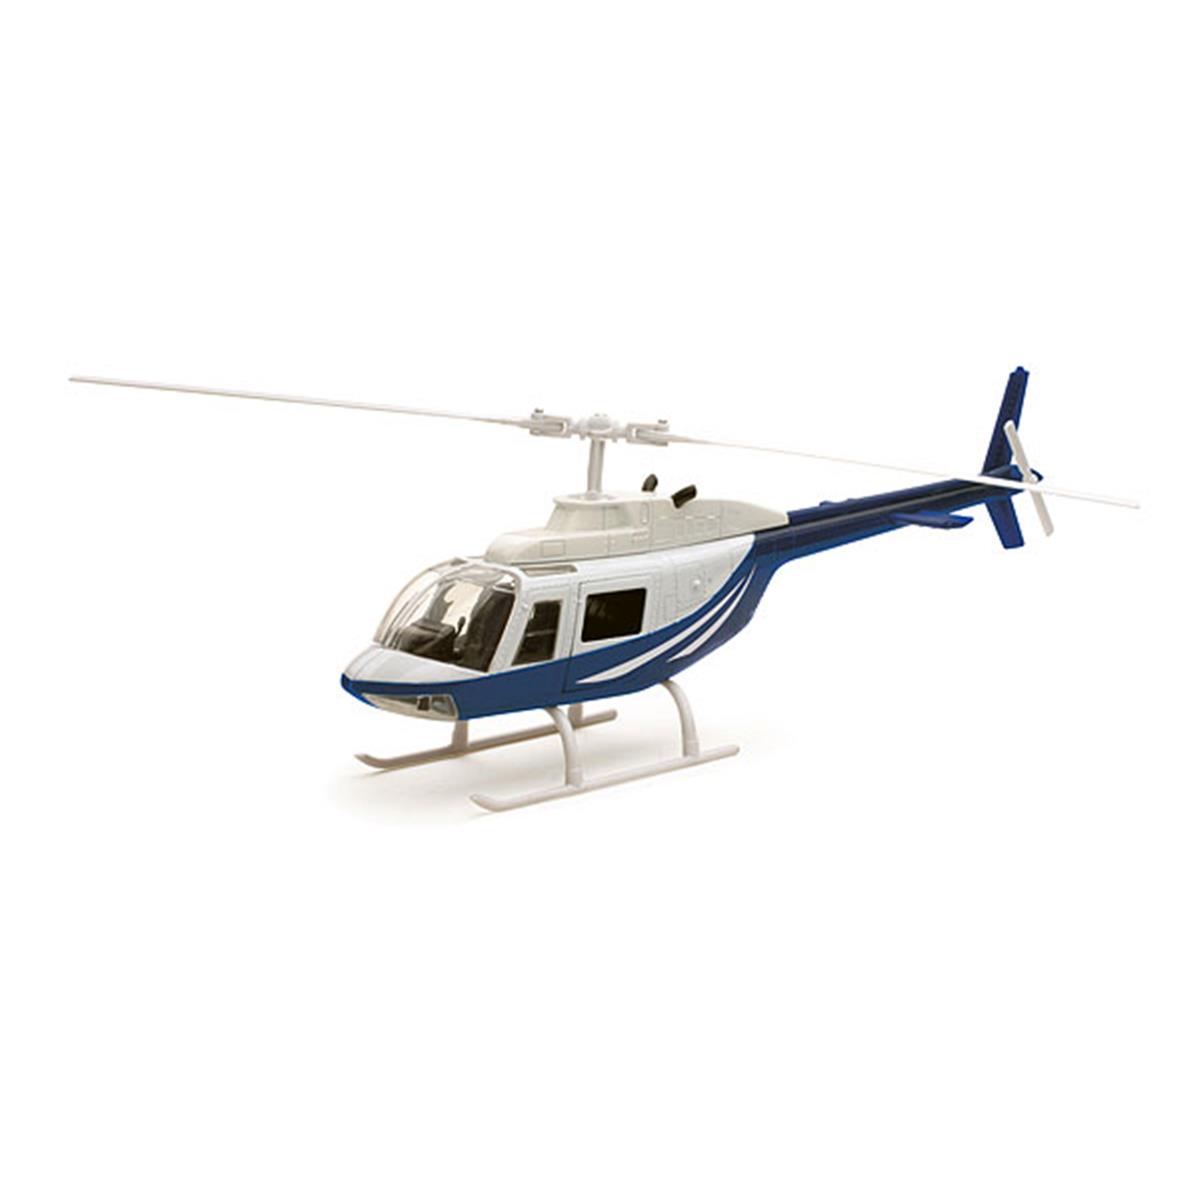 Time2Play New-Ray Bell 206 Helicopter Model